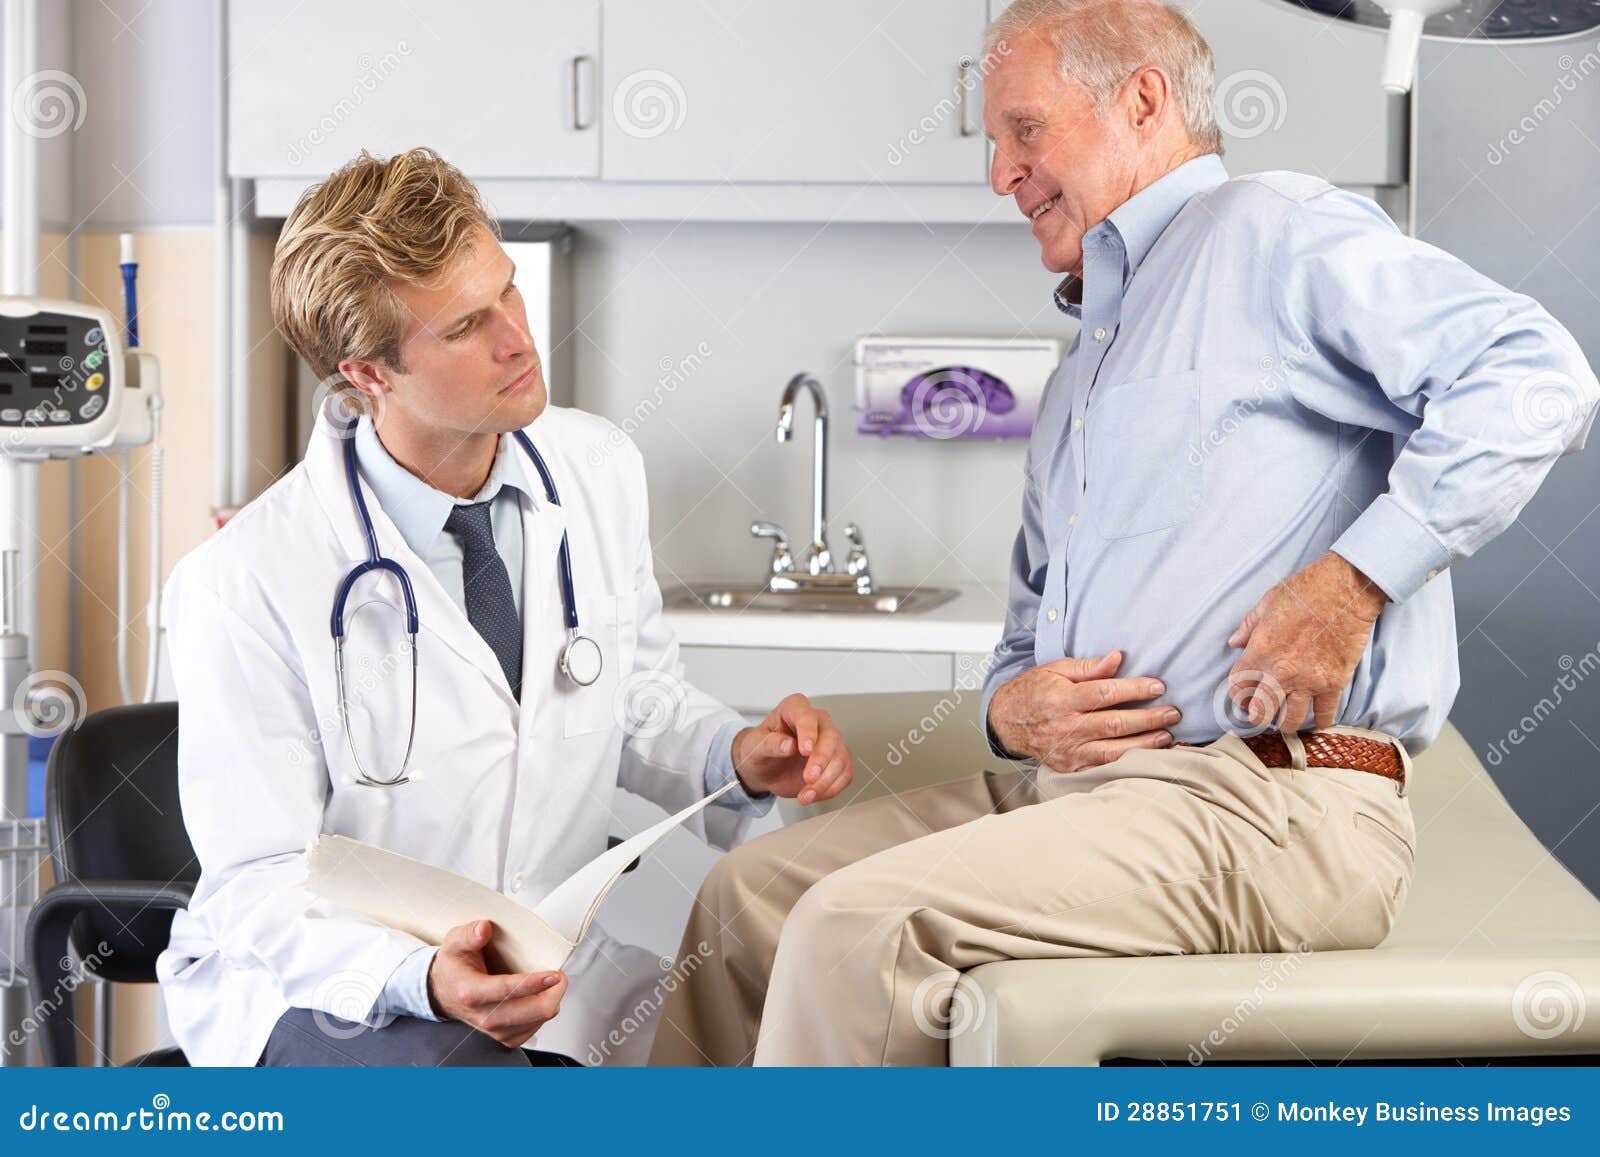 doctor examining male patient with hip pain